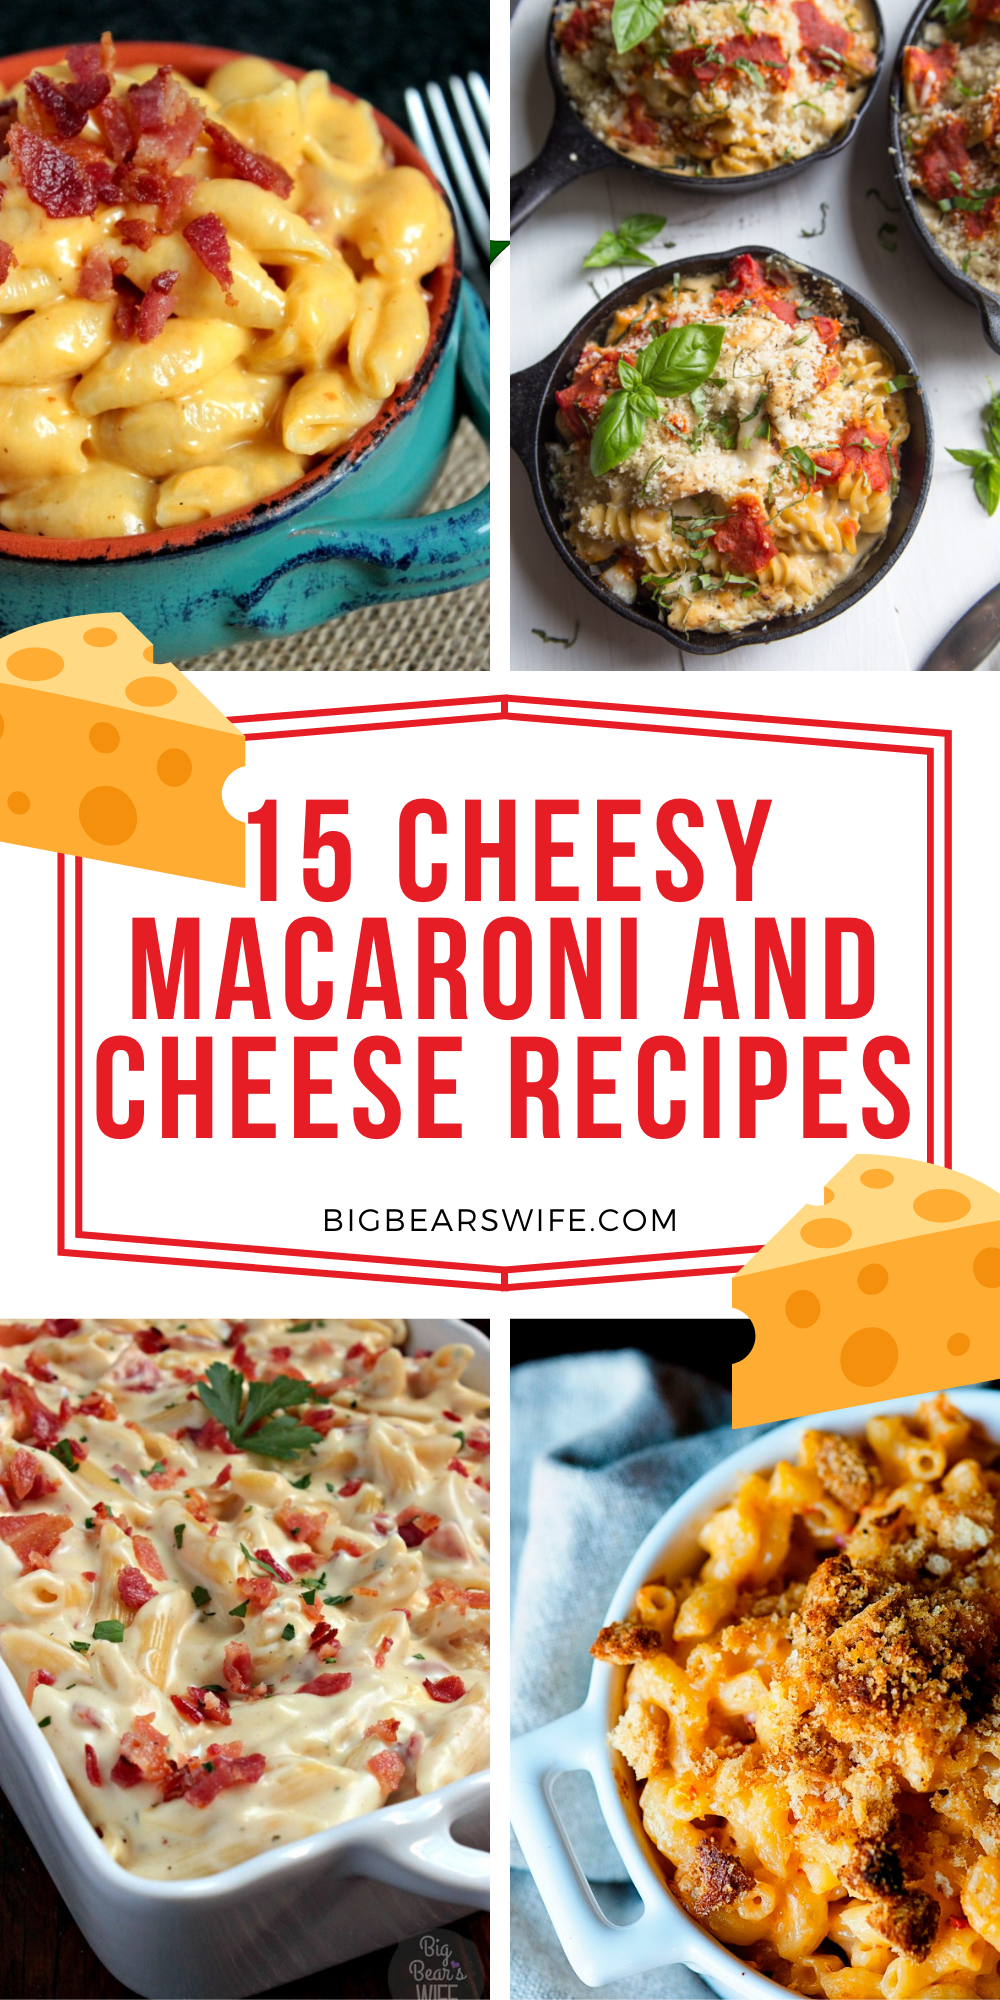 One of my favorite side dishes at holiday dinners has always been mac and cheese! These recipes are sure to be a winner on your dinner table! Here are 15 Cheesy Macaroni and Cheese Recipes for you to pick from! via @bigbearswife